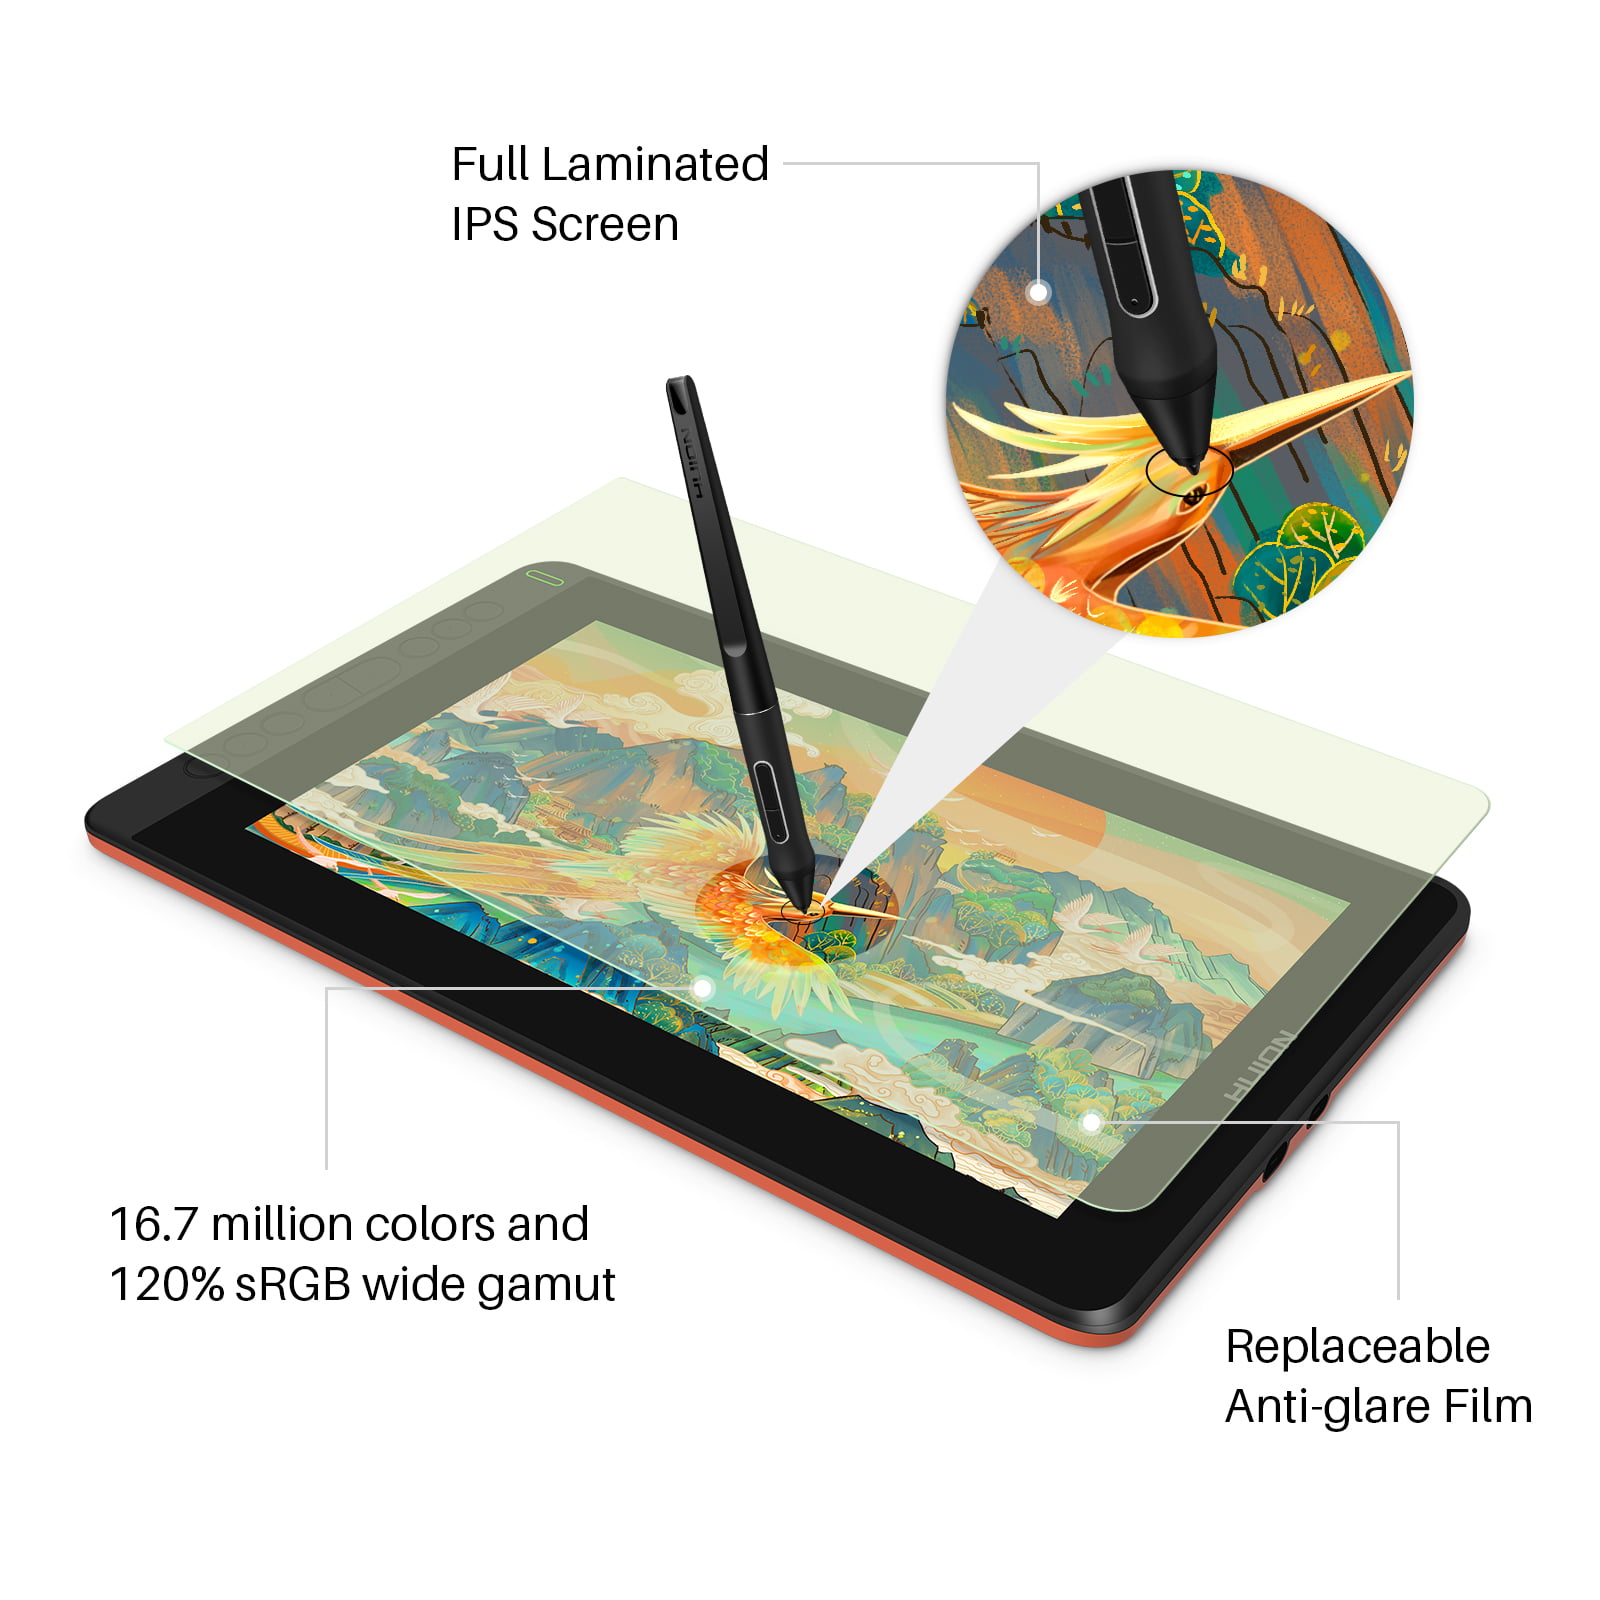 HUION KAMVAS 12 Drawing Tablet with Screen, Full-Laminated